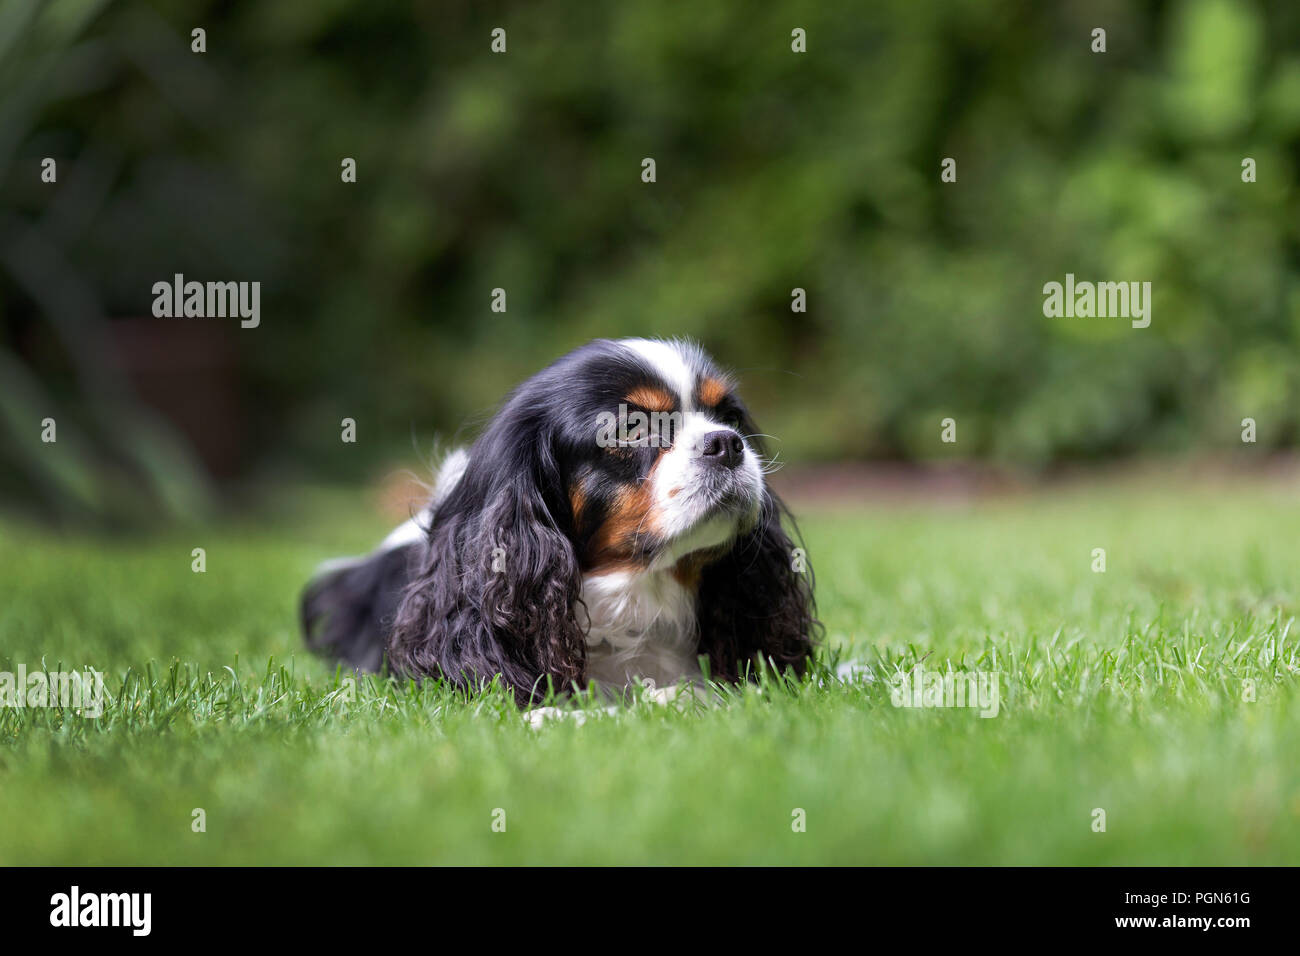 Cute dog lying on the grass in the garden Stock Photo